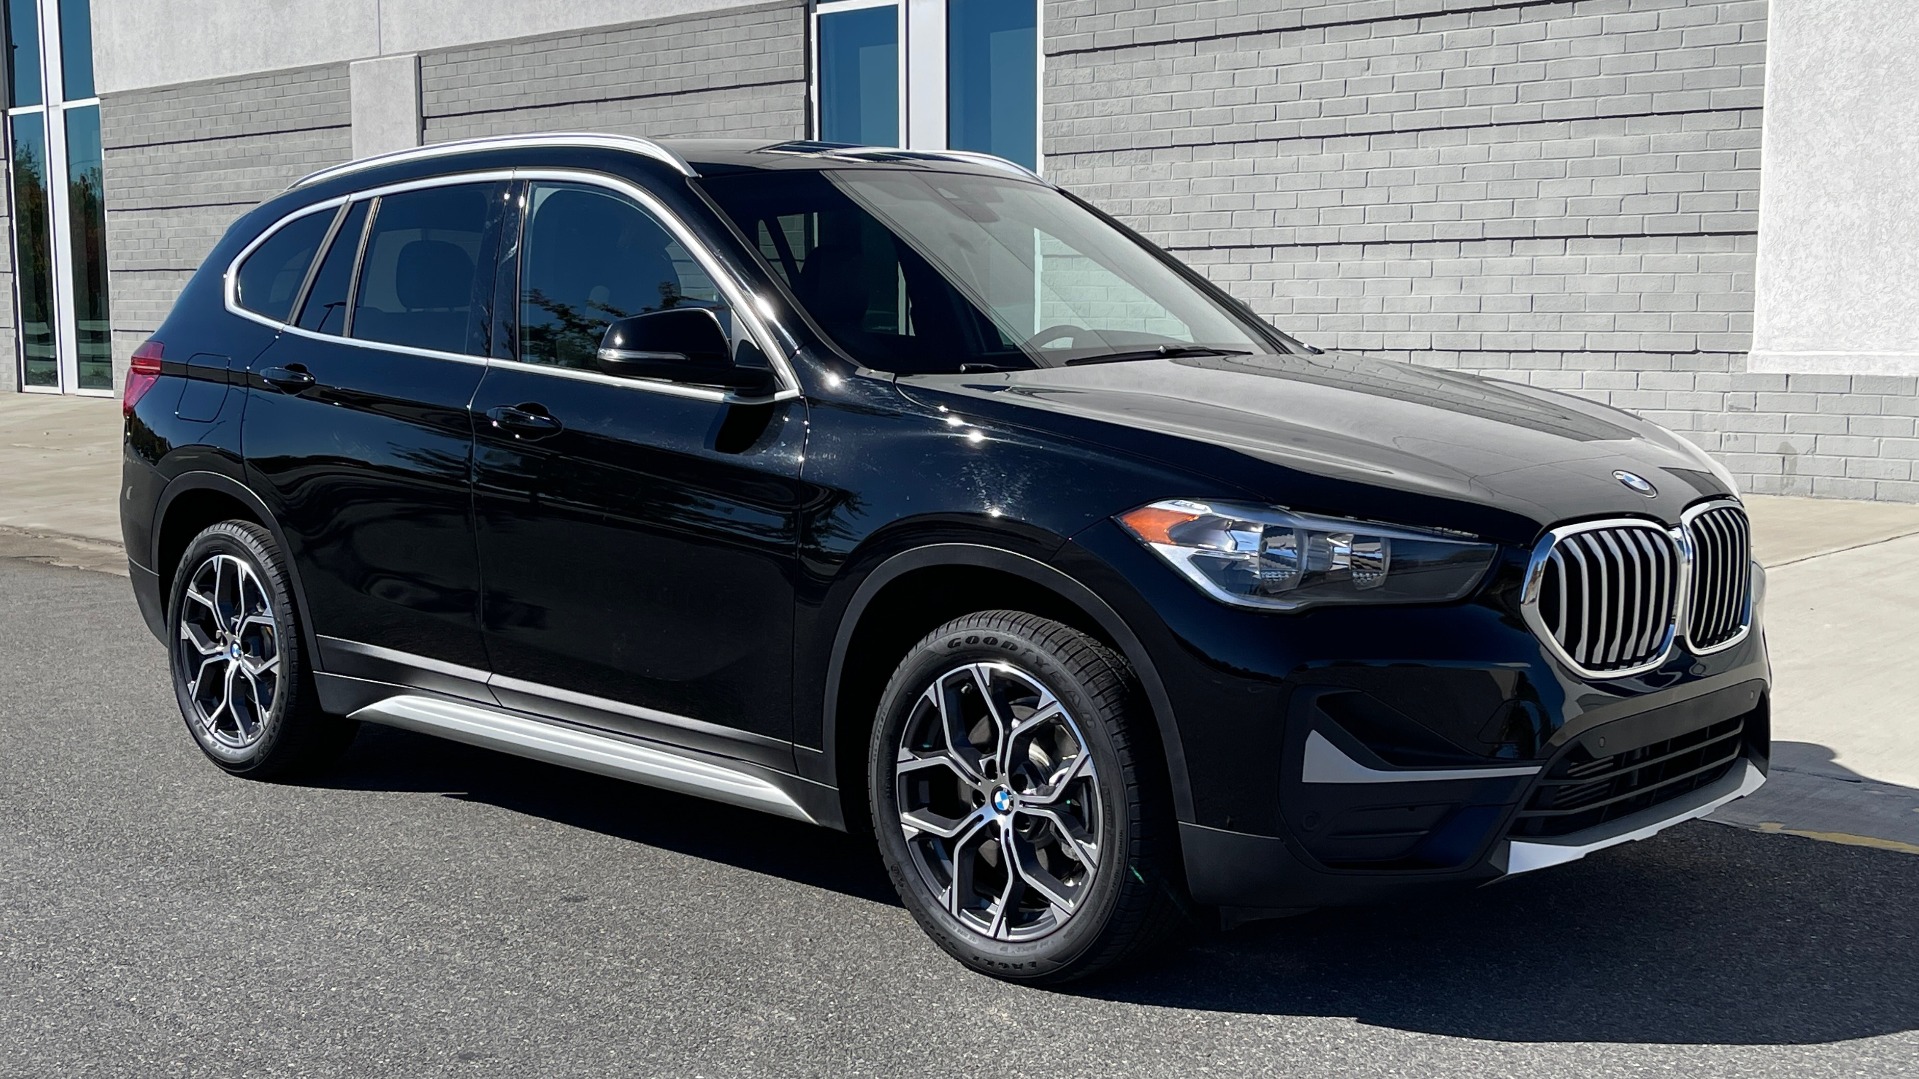 Used 2020 BMW X1 SDRIVE28I / 2.0L / 8-SPD STEPTRONIC AUTO / LEATHER / REARVIEW for sale Sold at Formula Imports in Charlotte NC 28227 5